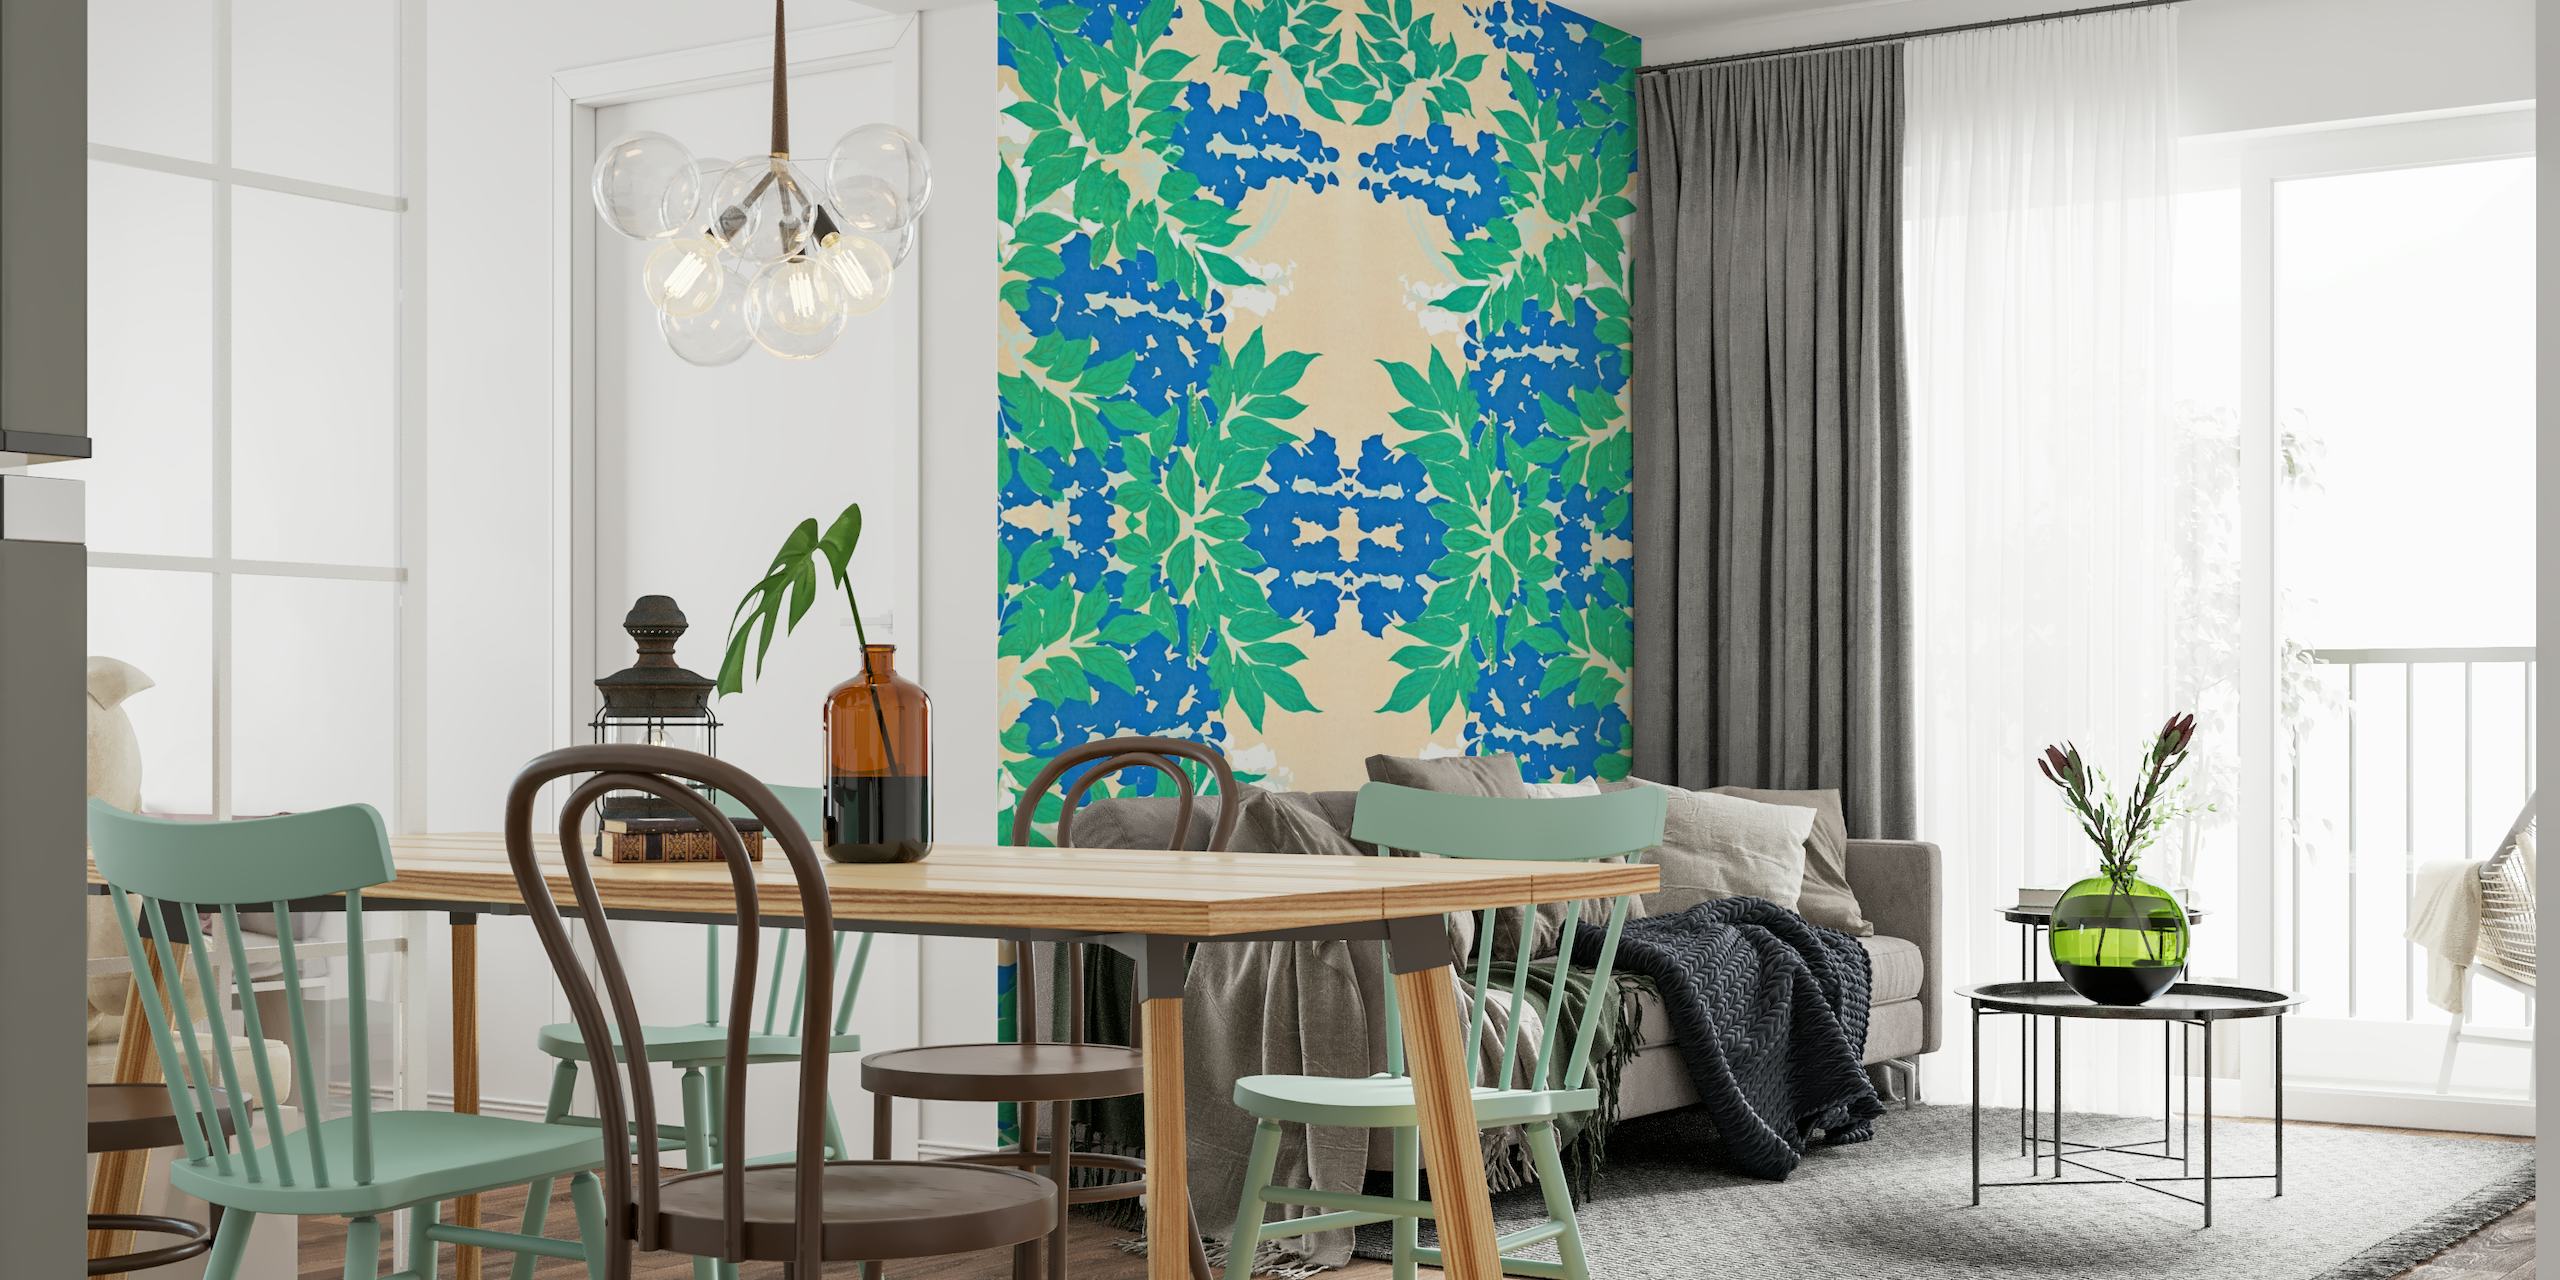 Floral Kyoto Leaves wall mural with blue and green foliage on cream background